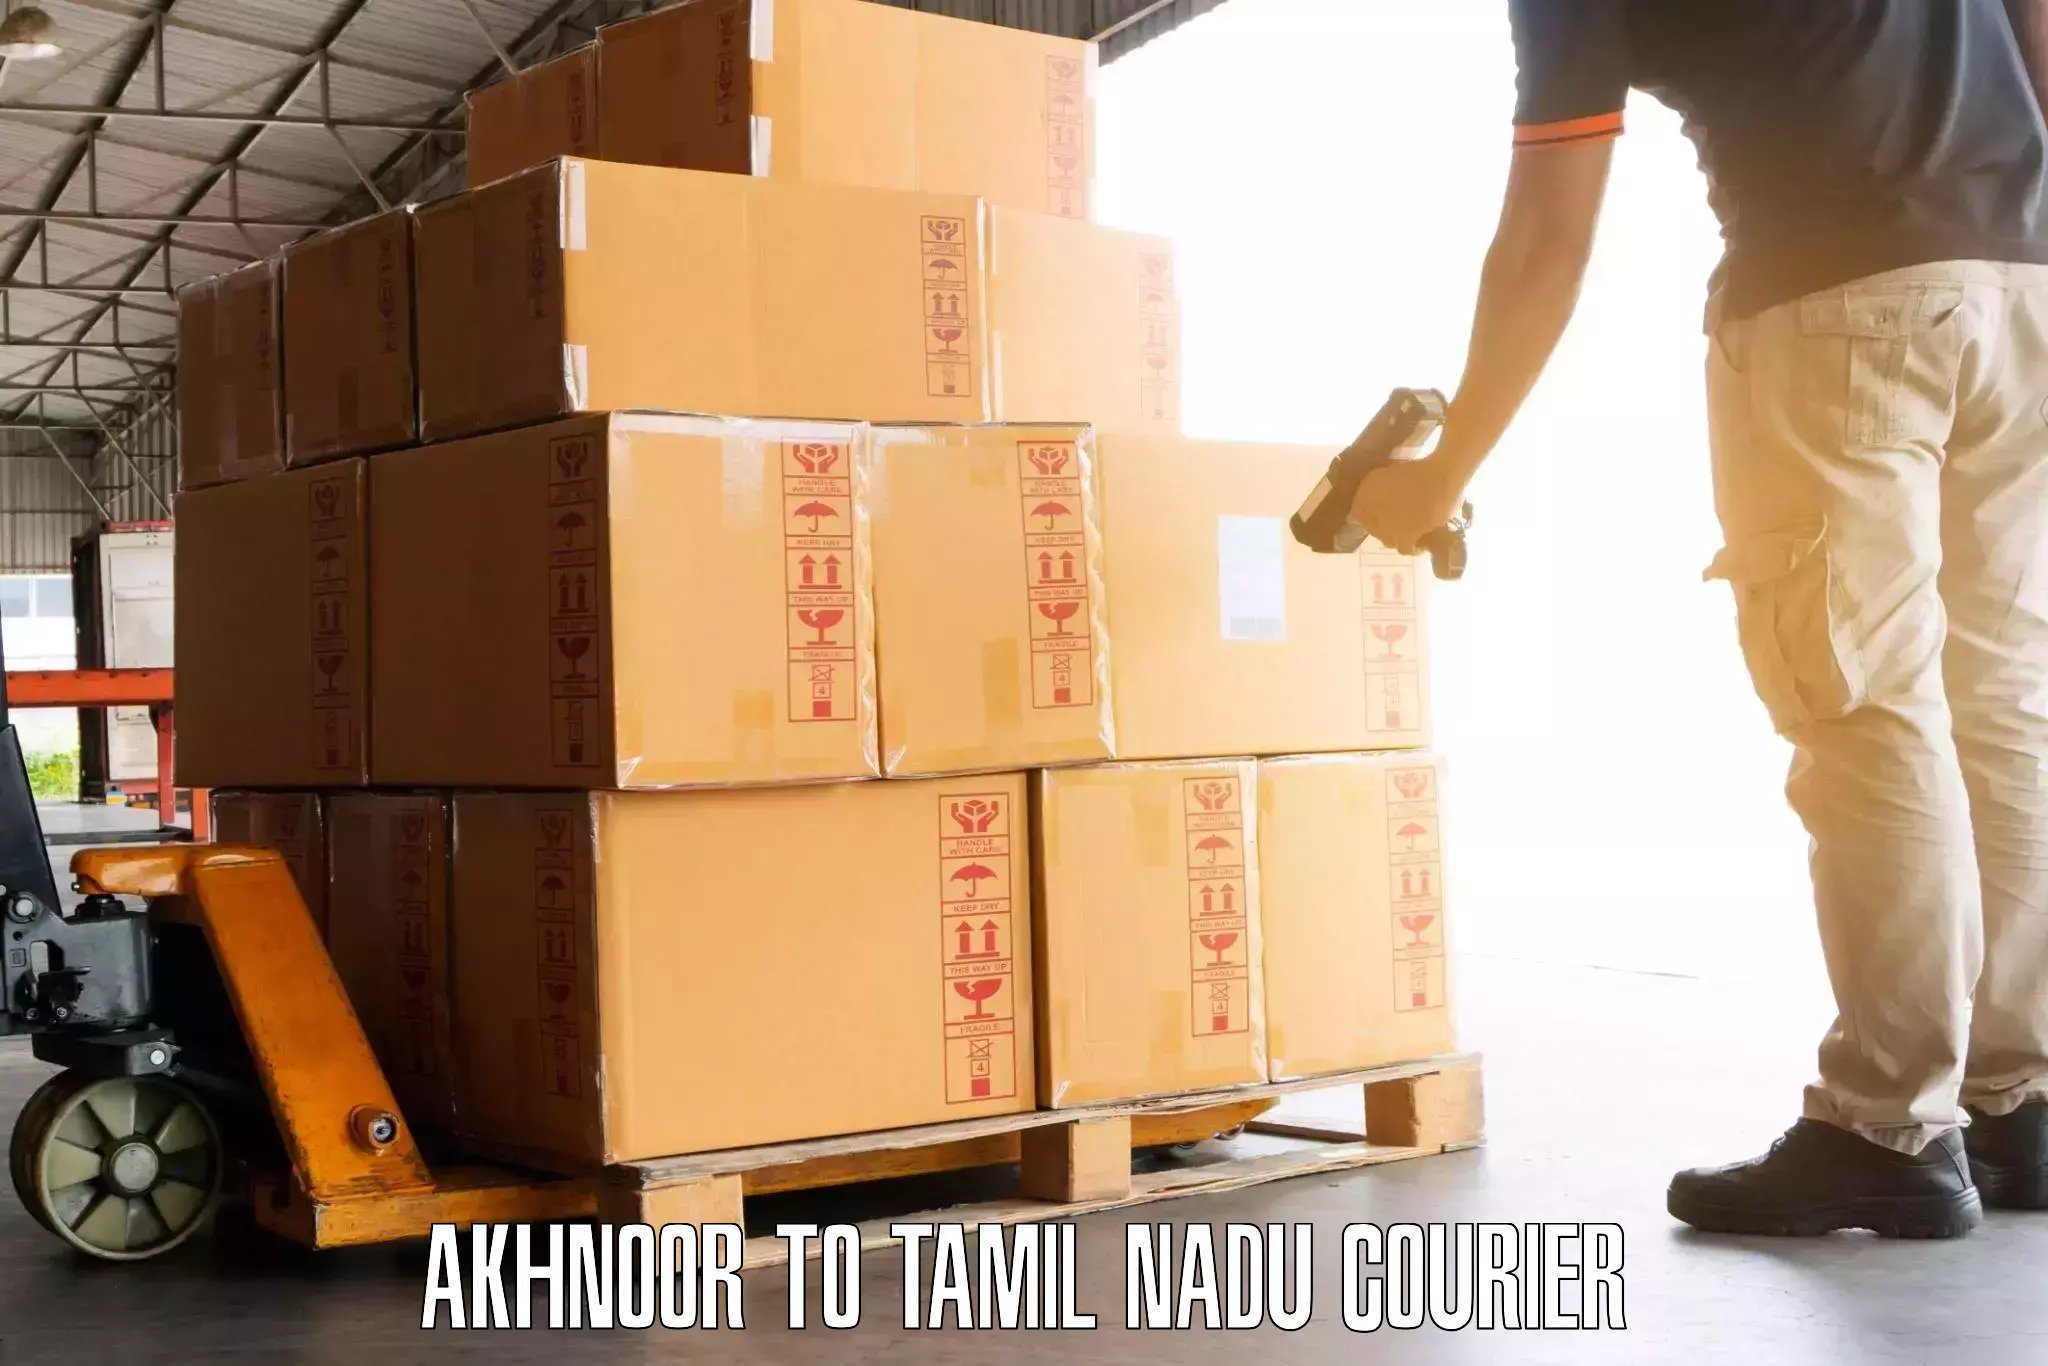 Personal effects shipping in Akhnoor to Hosur